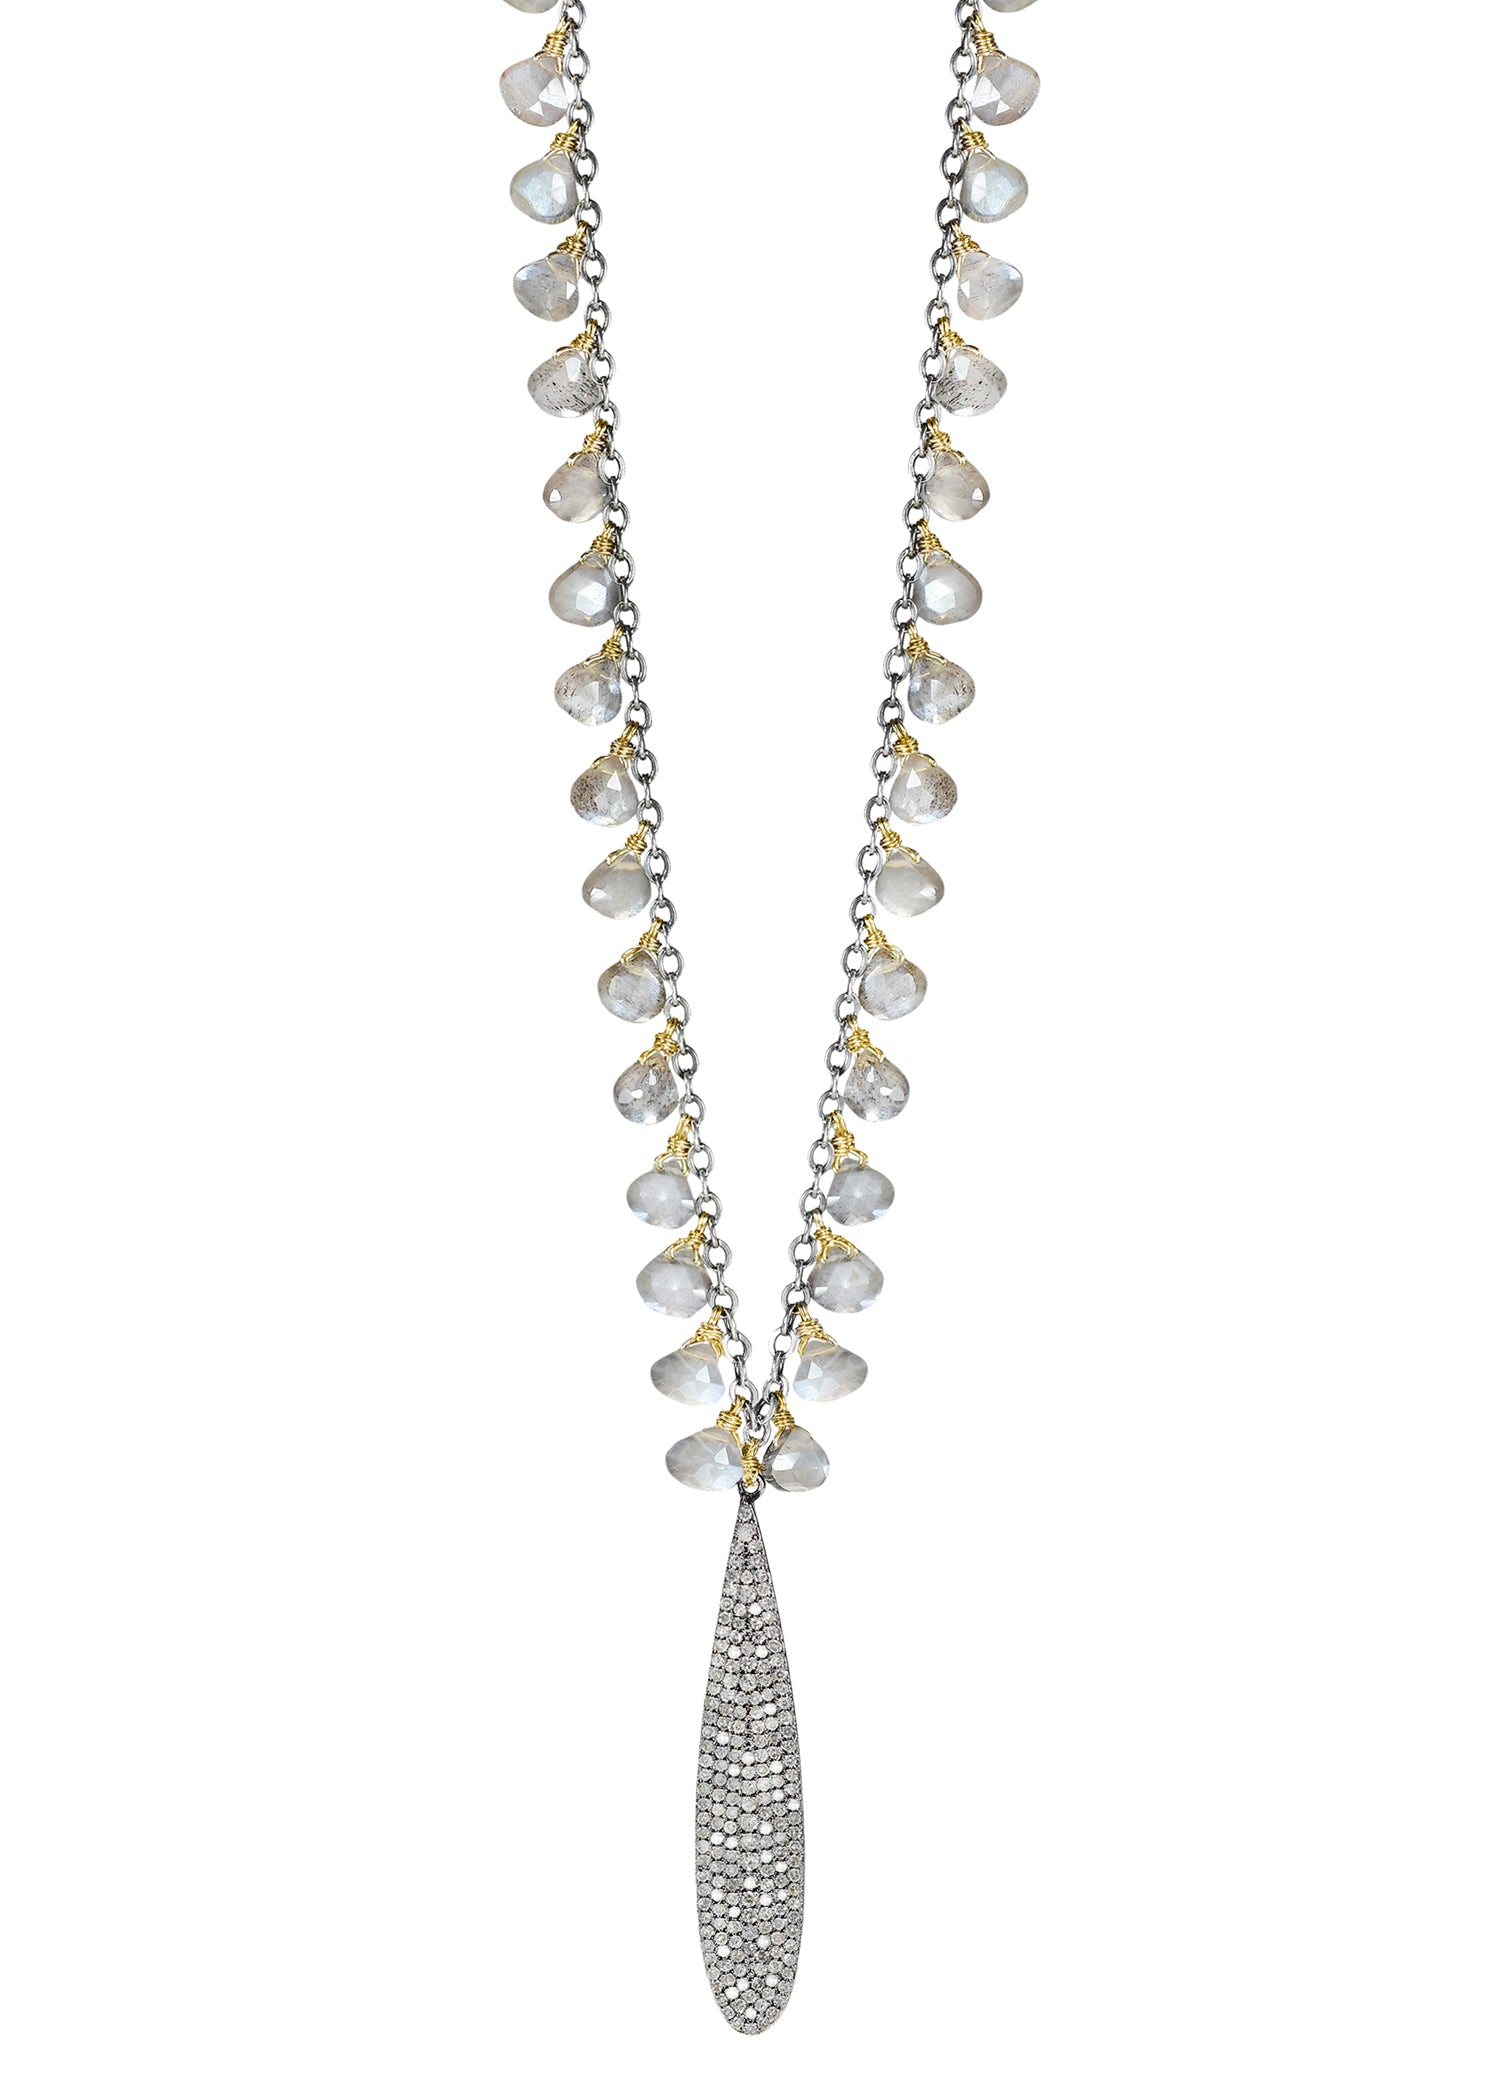 Diamond Gray moonstone 14k gold Sterling silver Mixed metal Special order only Necklace measures 21" in length Moonstone measures 3/16" in length and 3/16" in width at the widest point Pave pendant measures 1-5/8" in length and 5/16" in width Handmade in our Los Angeles studio 